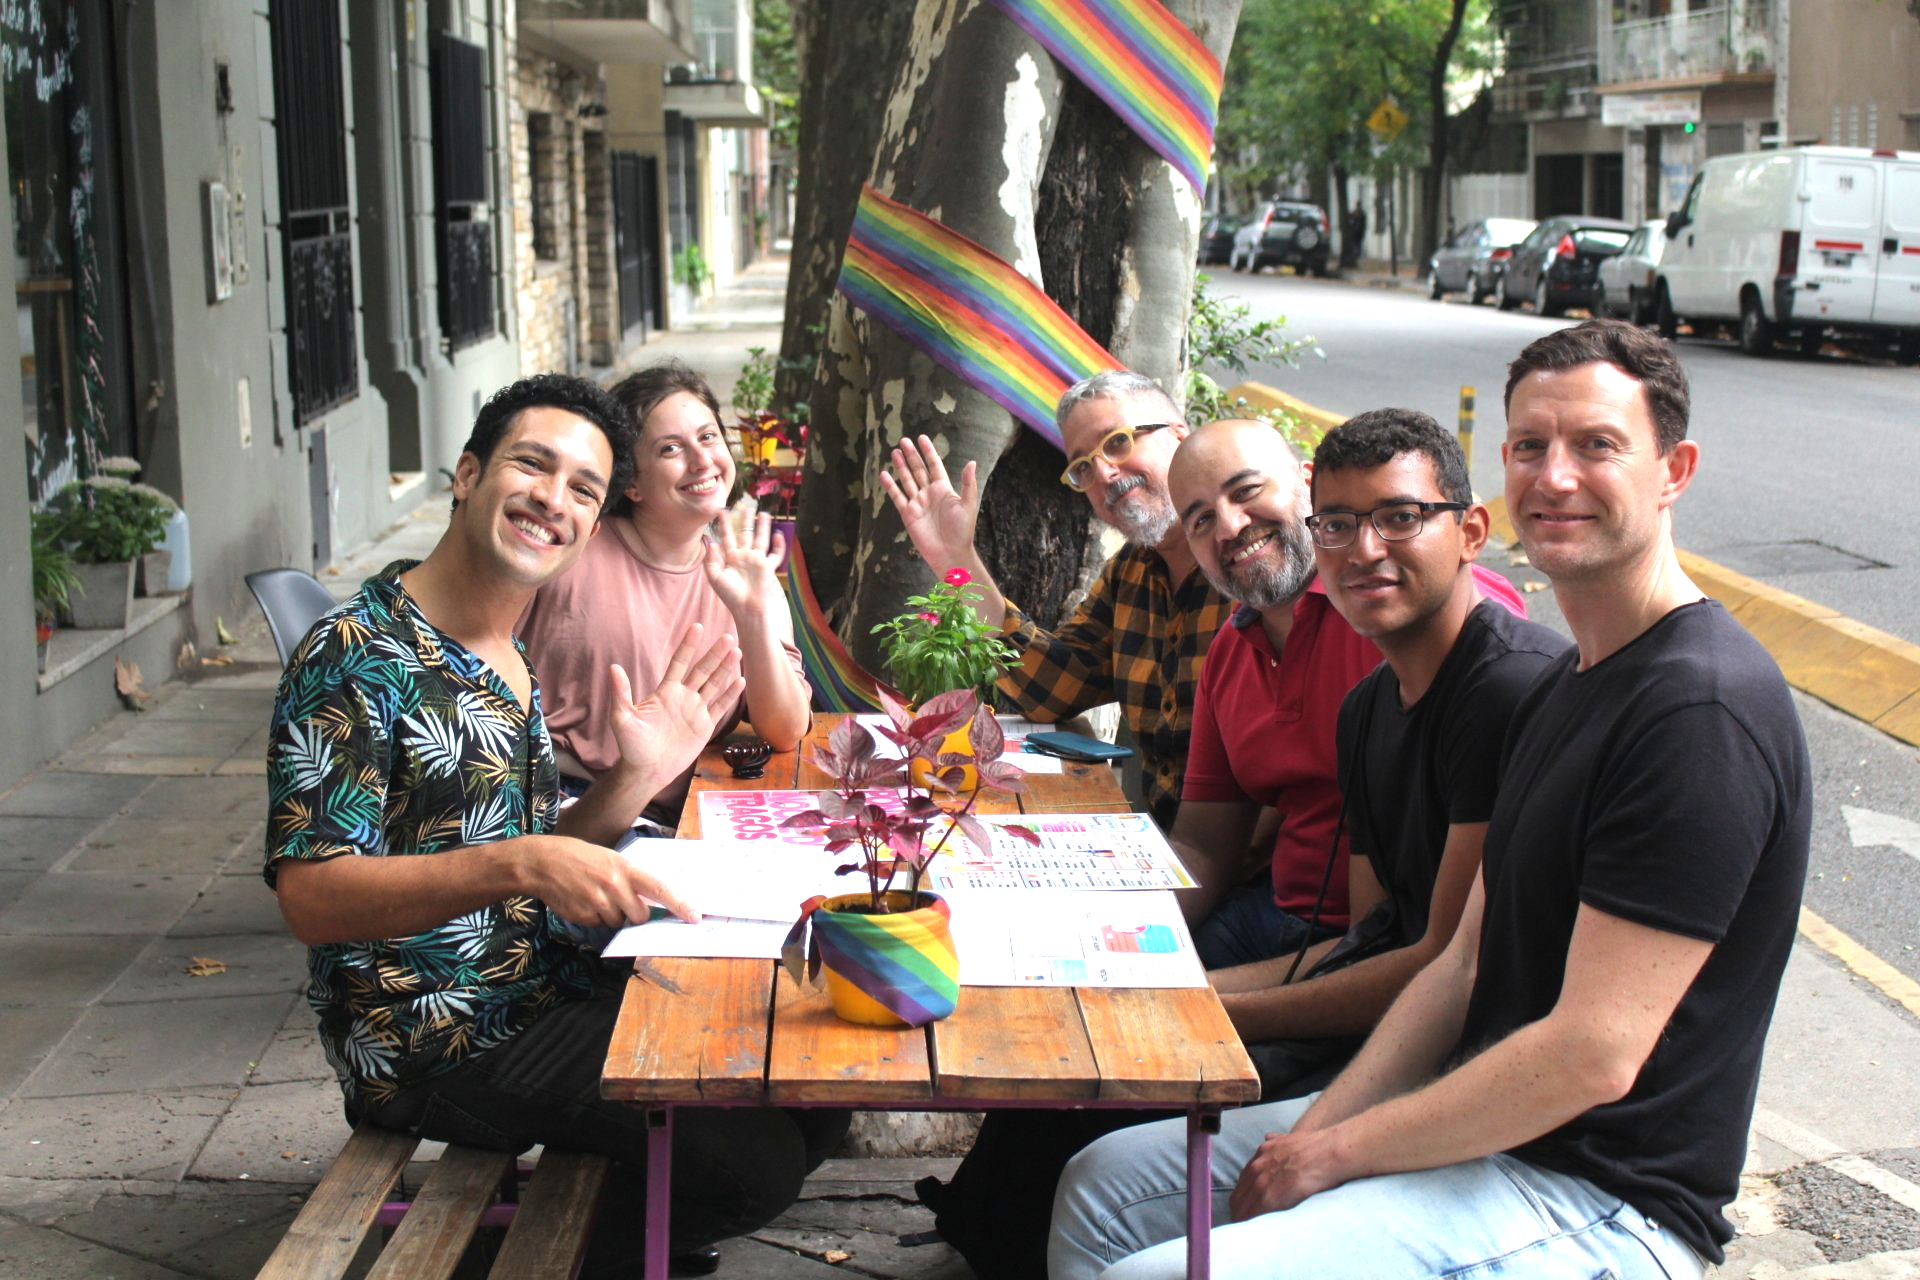 a group of men, women and a drag queen pose for the camera in a cafe